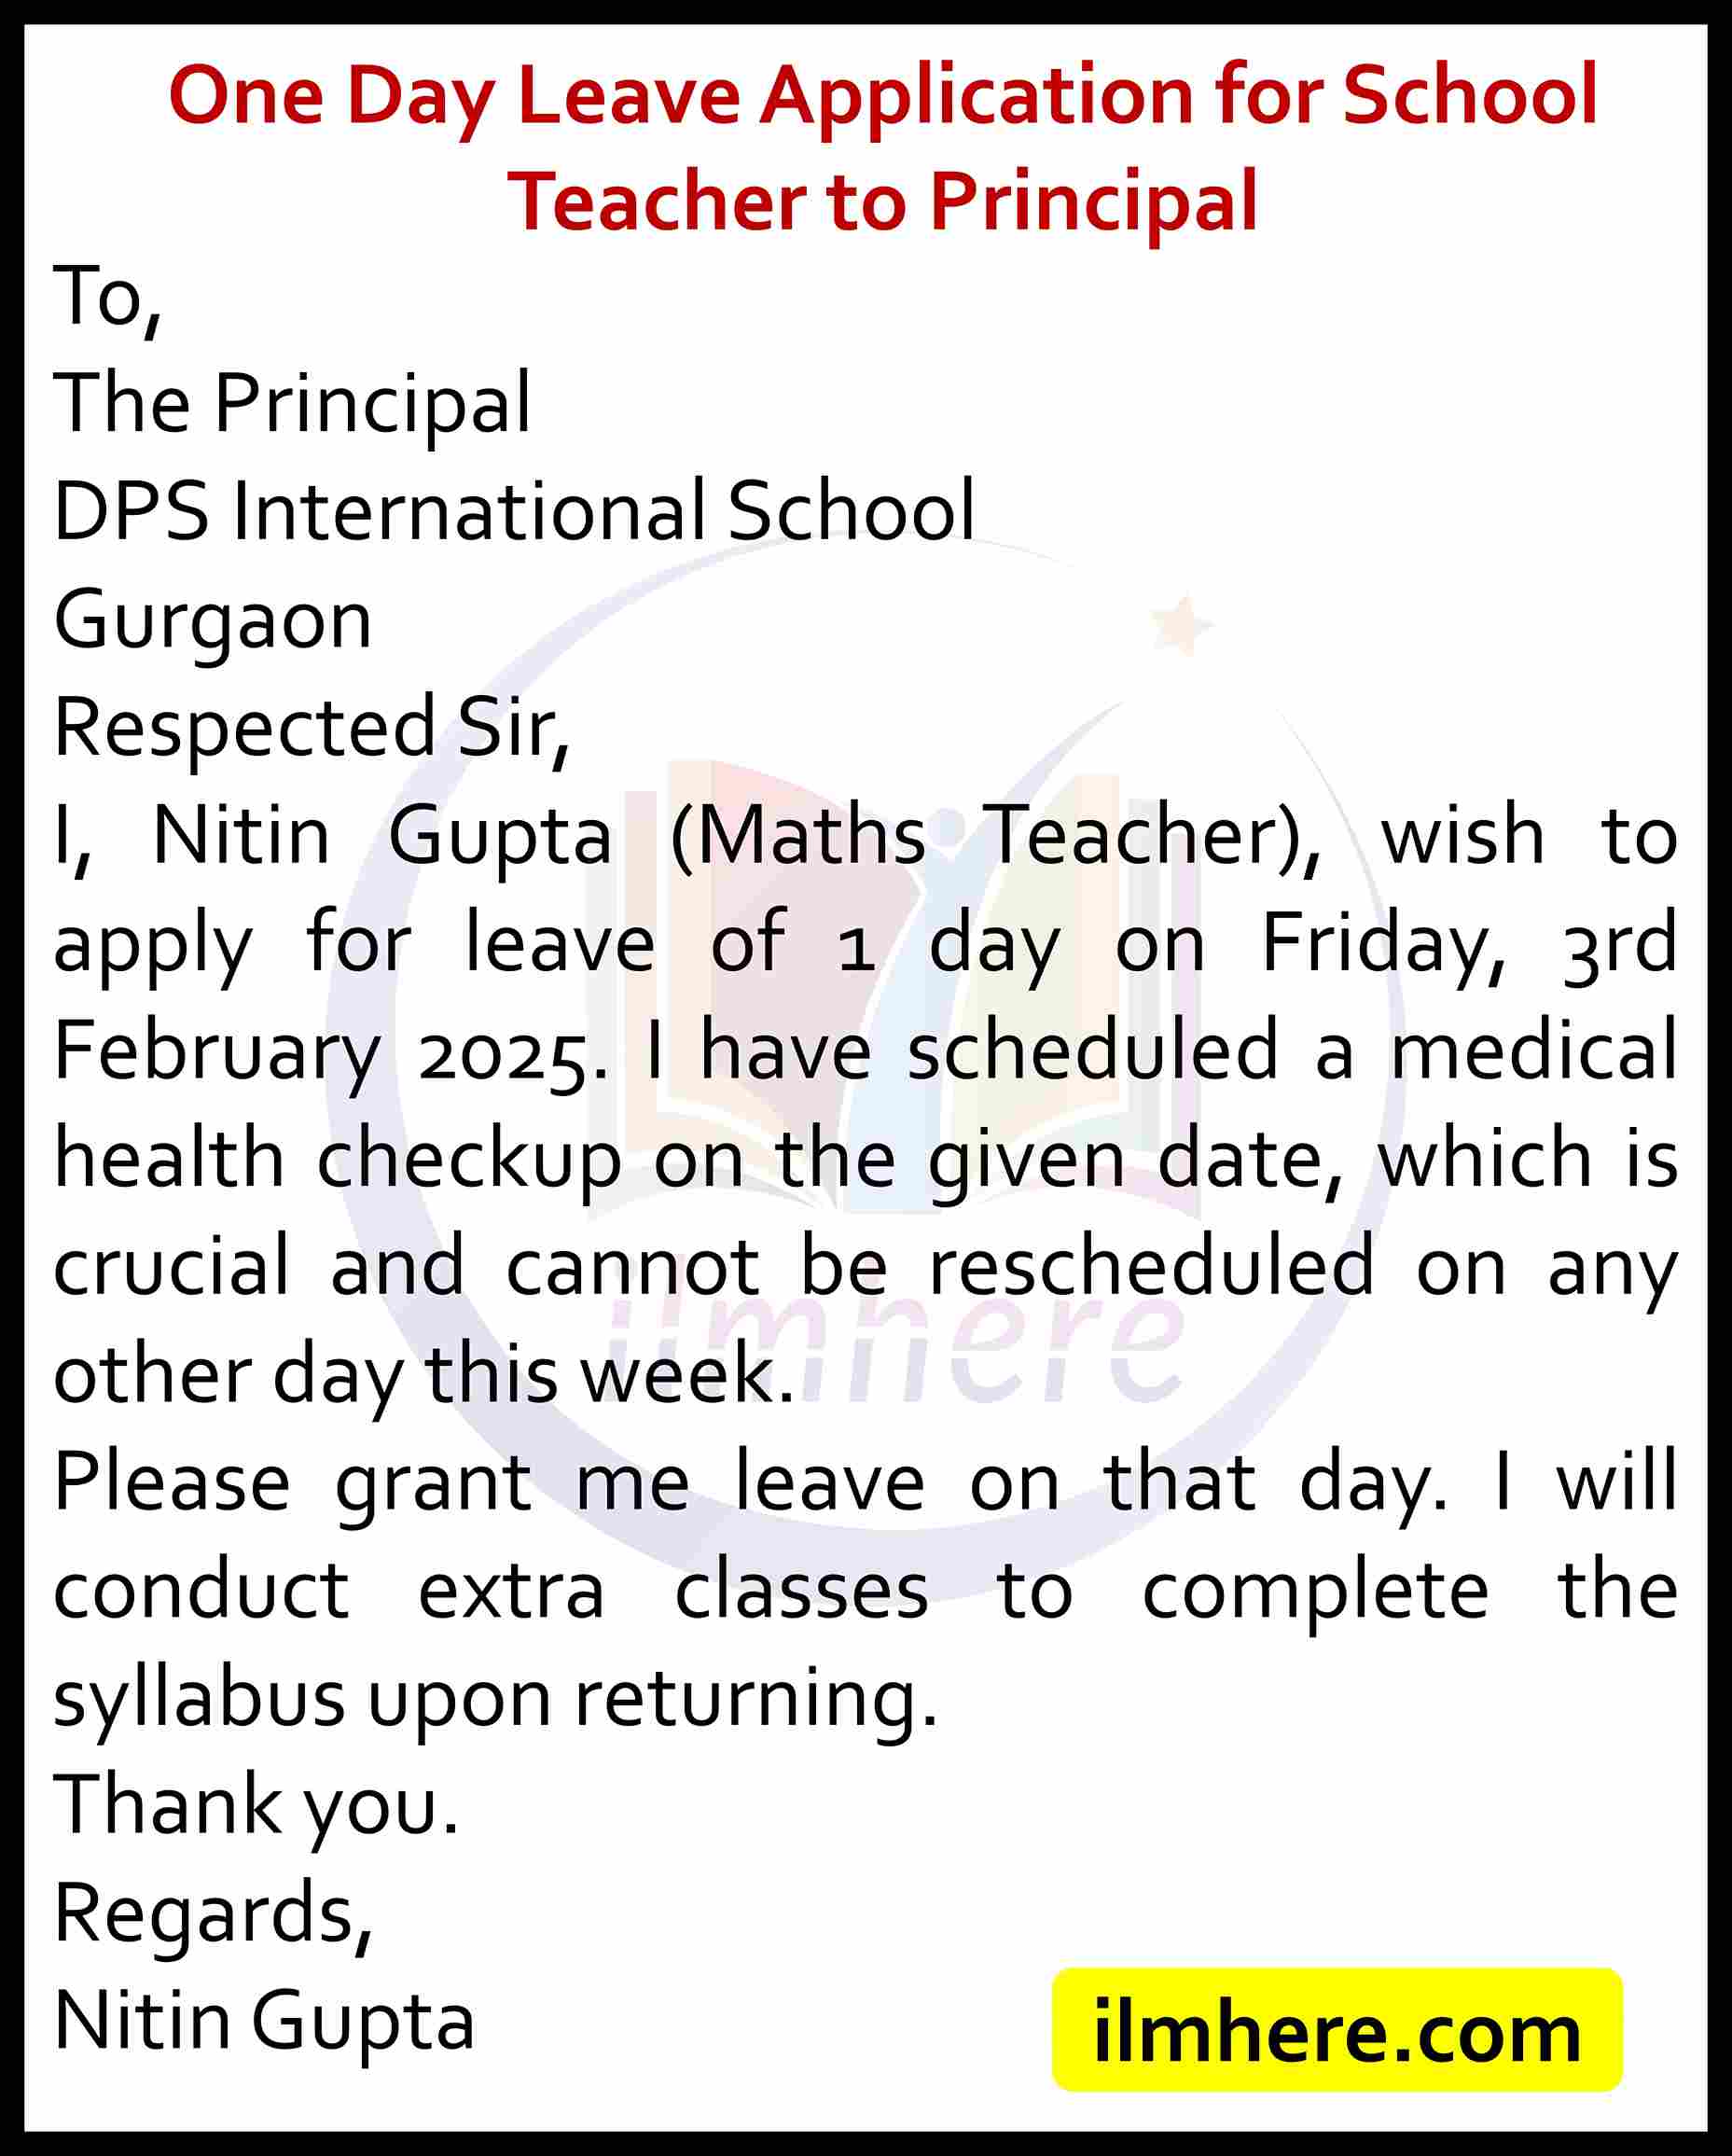 One Day Leave Application for School Teacher to Principal